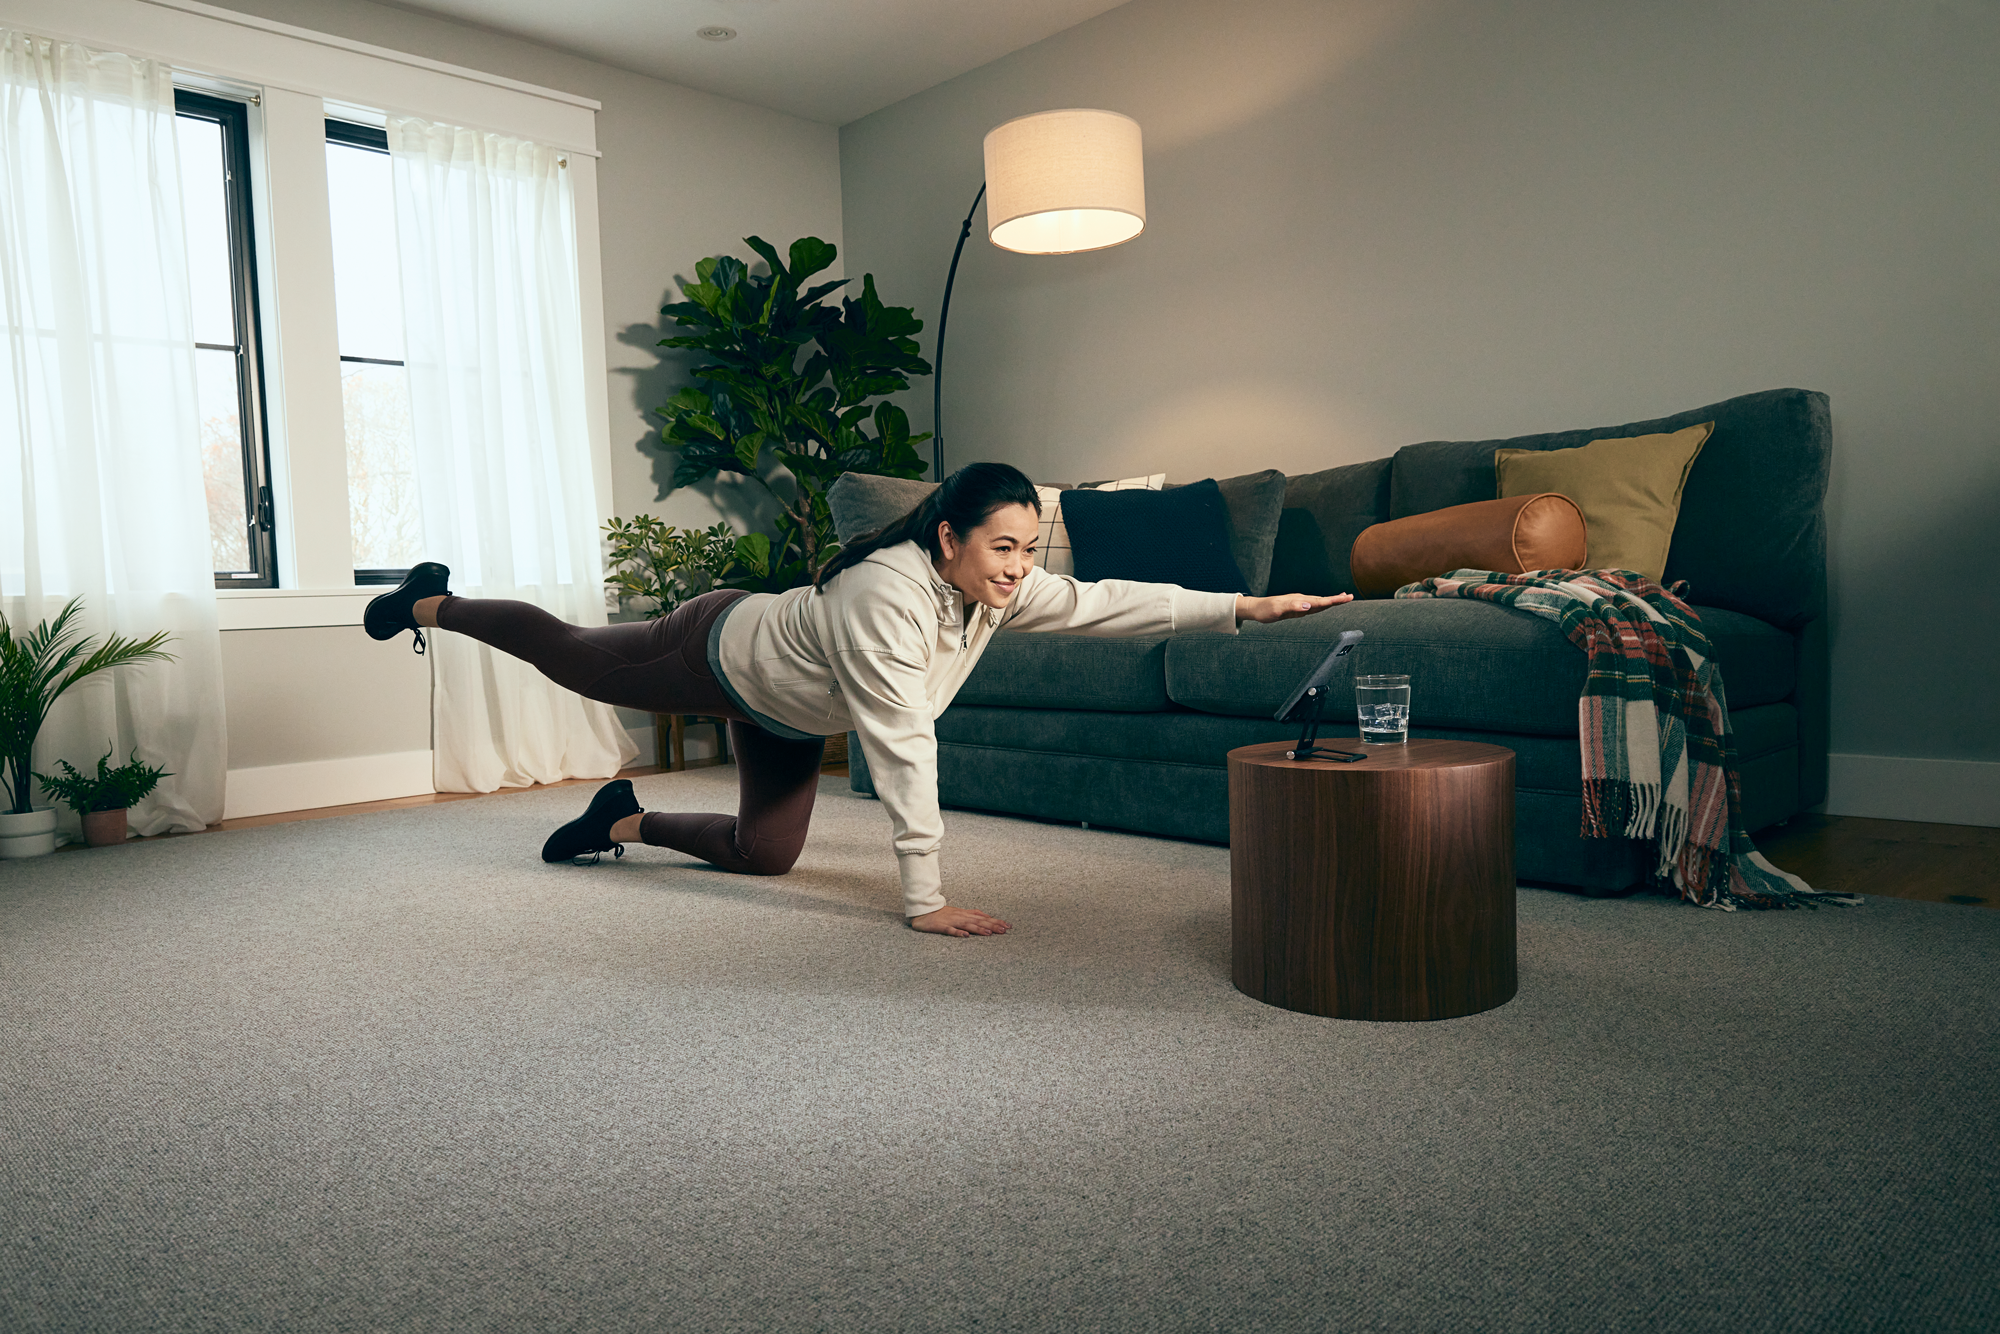 Woman doing exercise at home